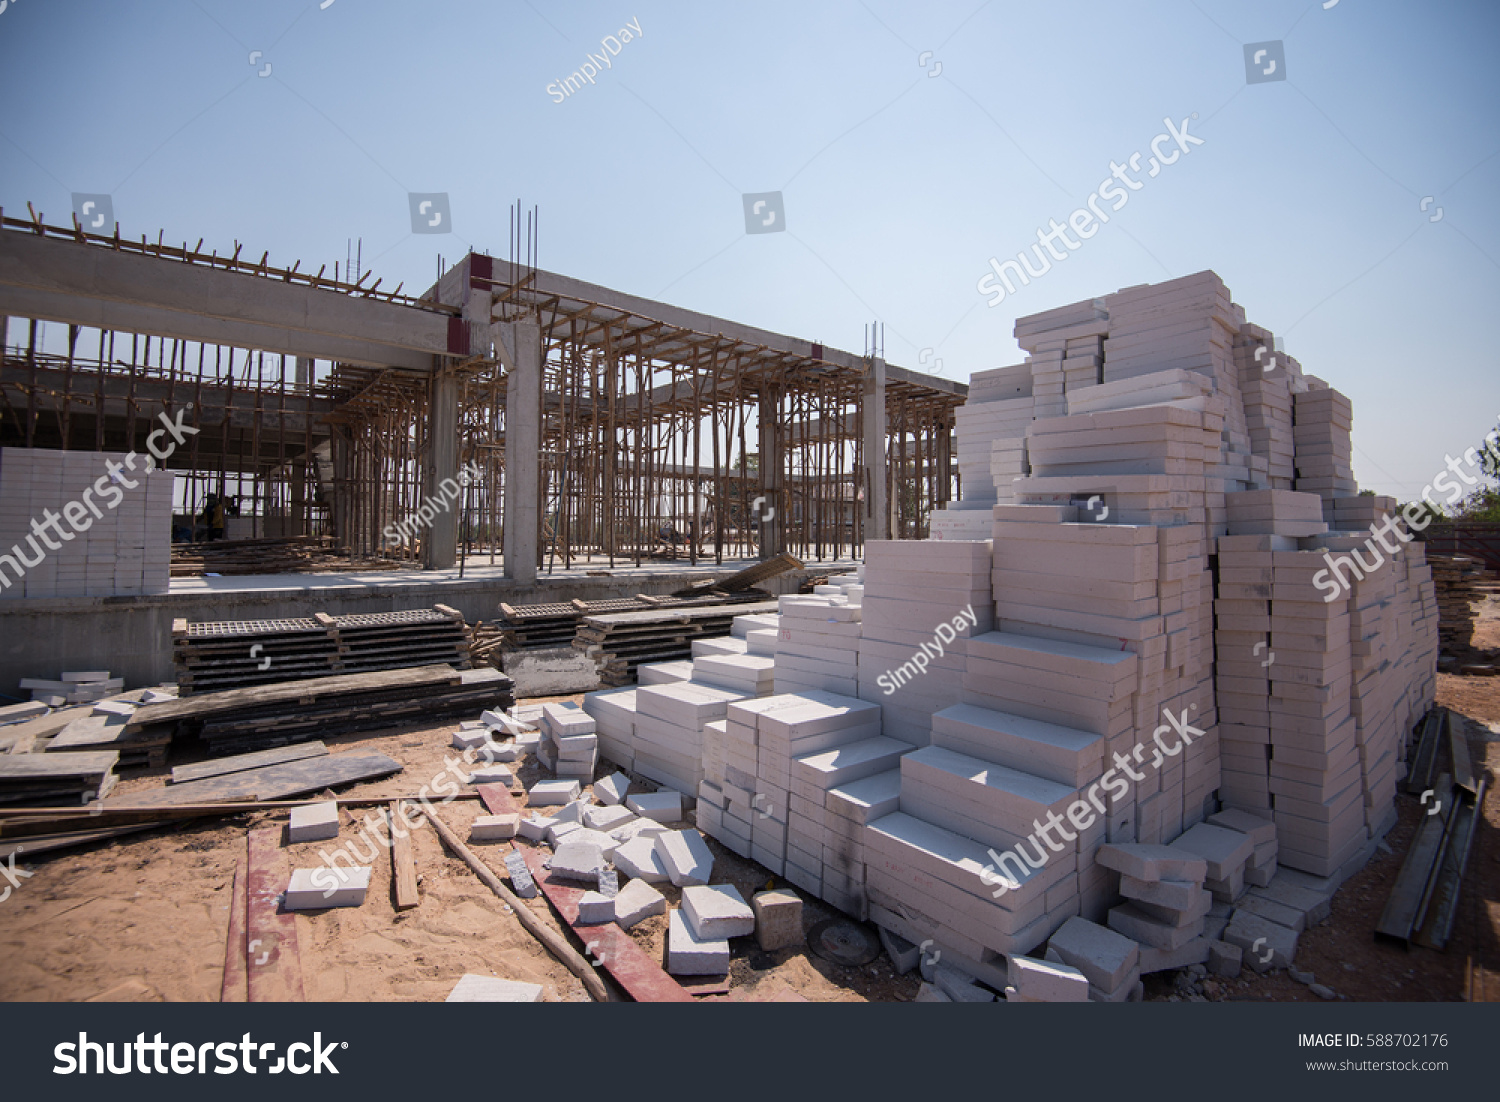 Brick for building in construction site. #588702176